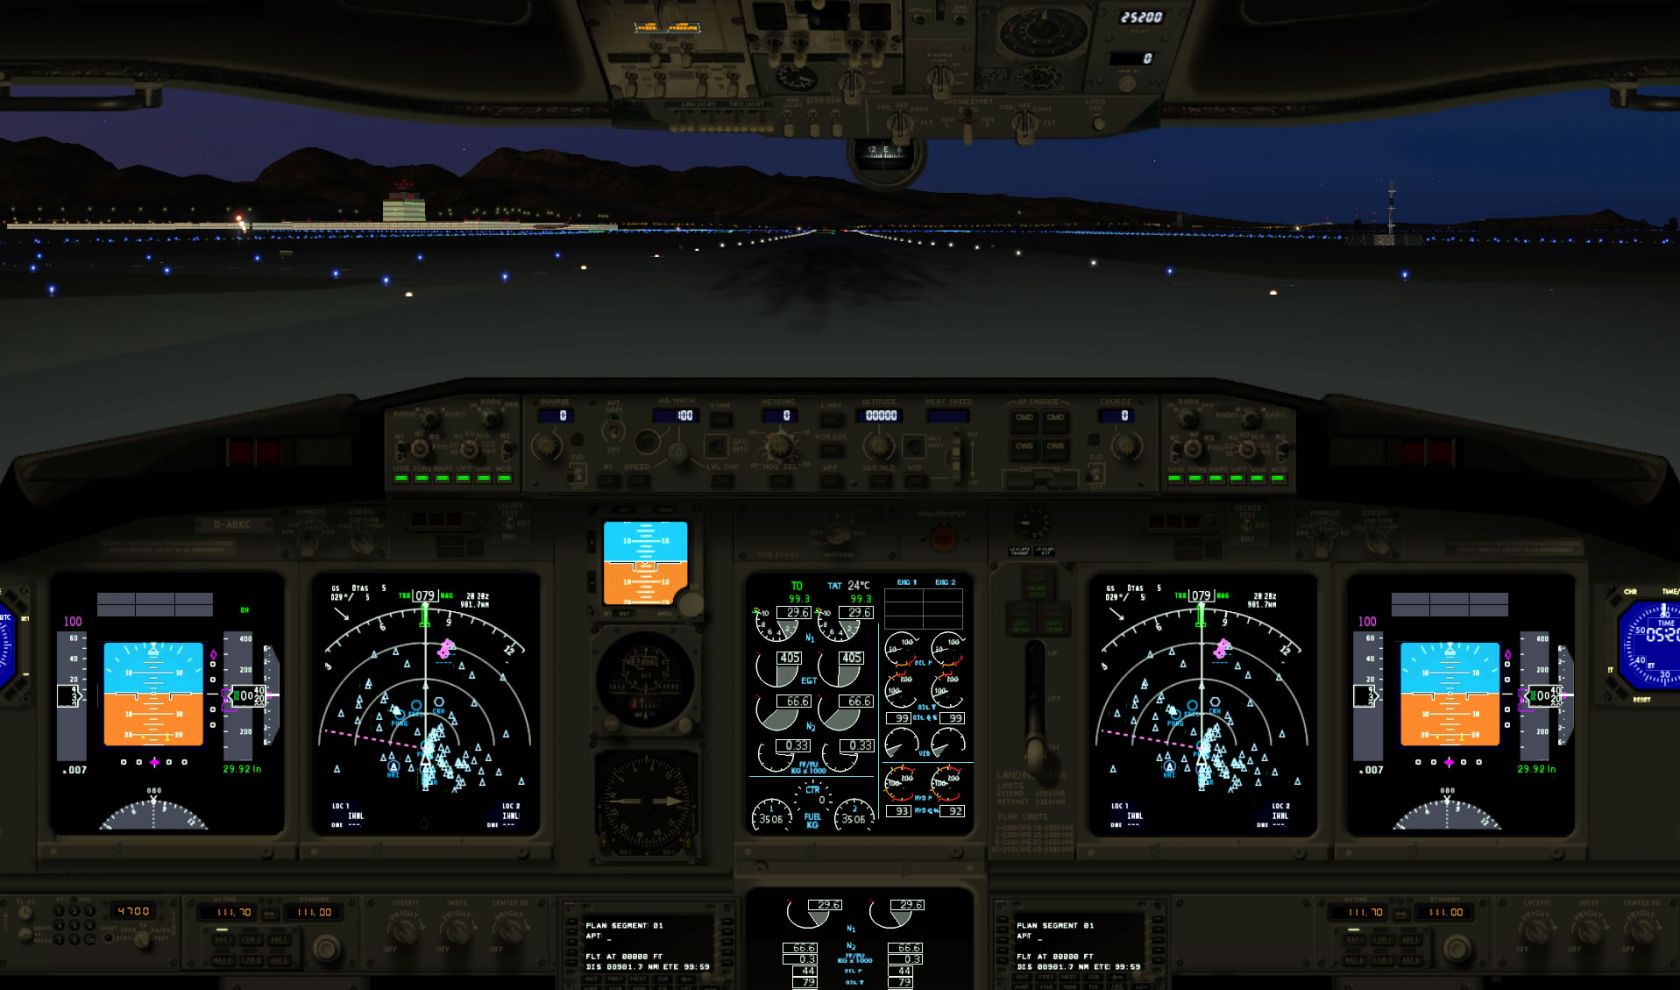 Cleared for Takeoff PHNL, 8L